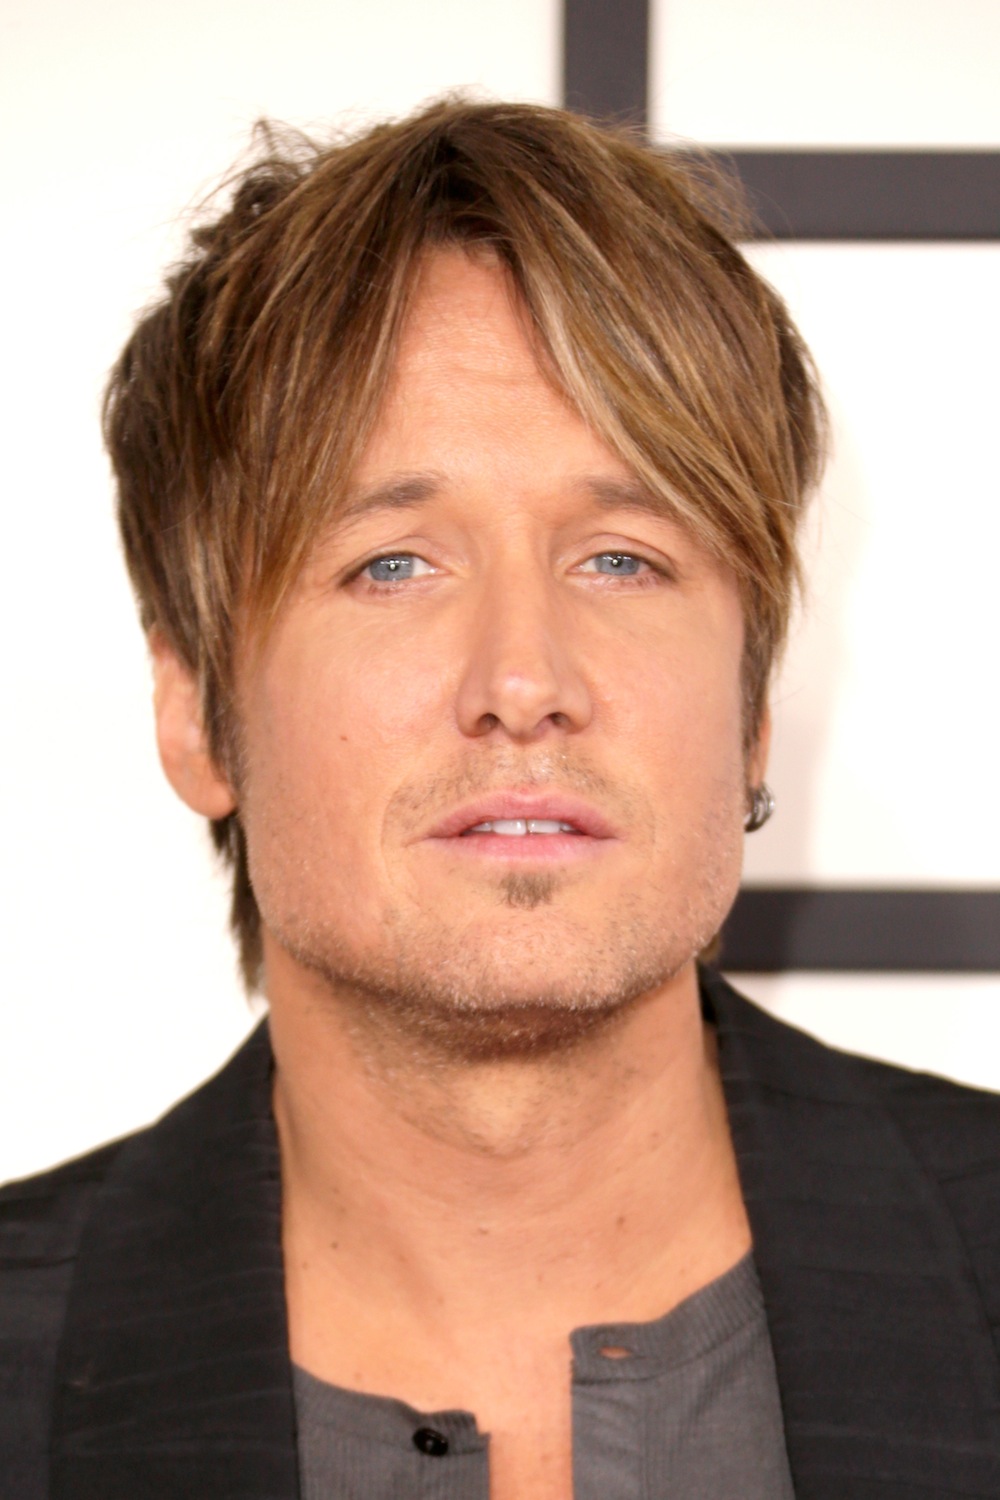 Why Did Keith Urban Break Down At The Grammys? The Singer Explains